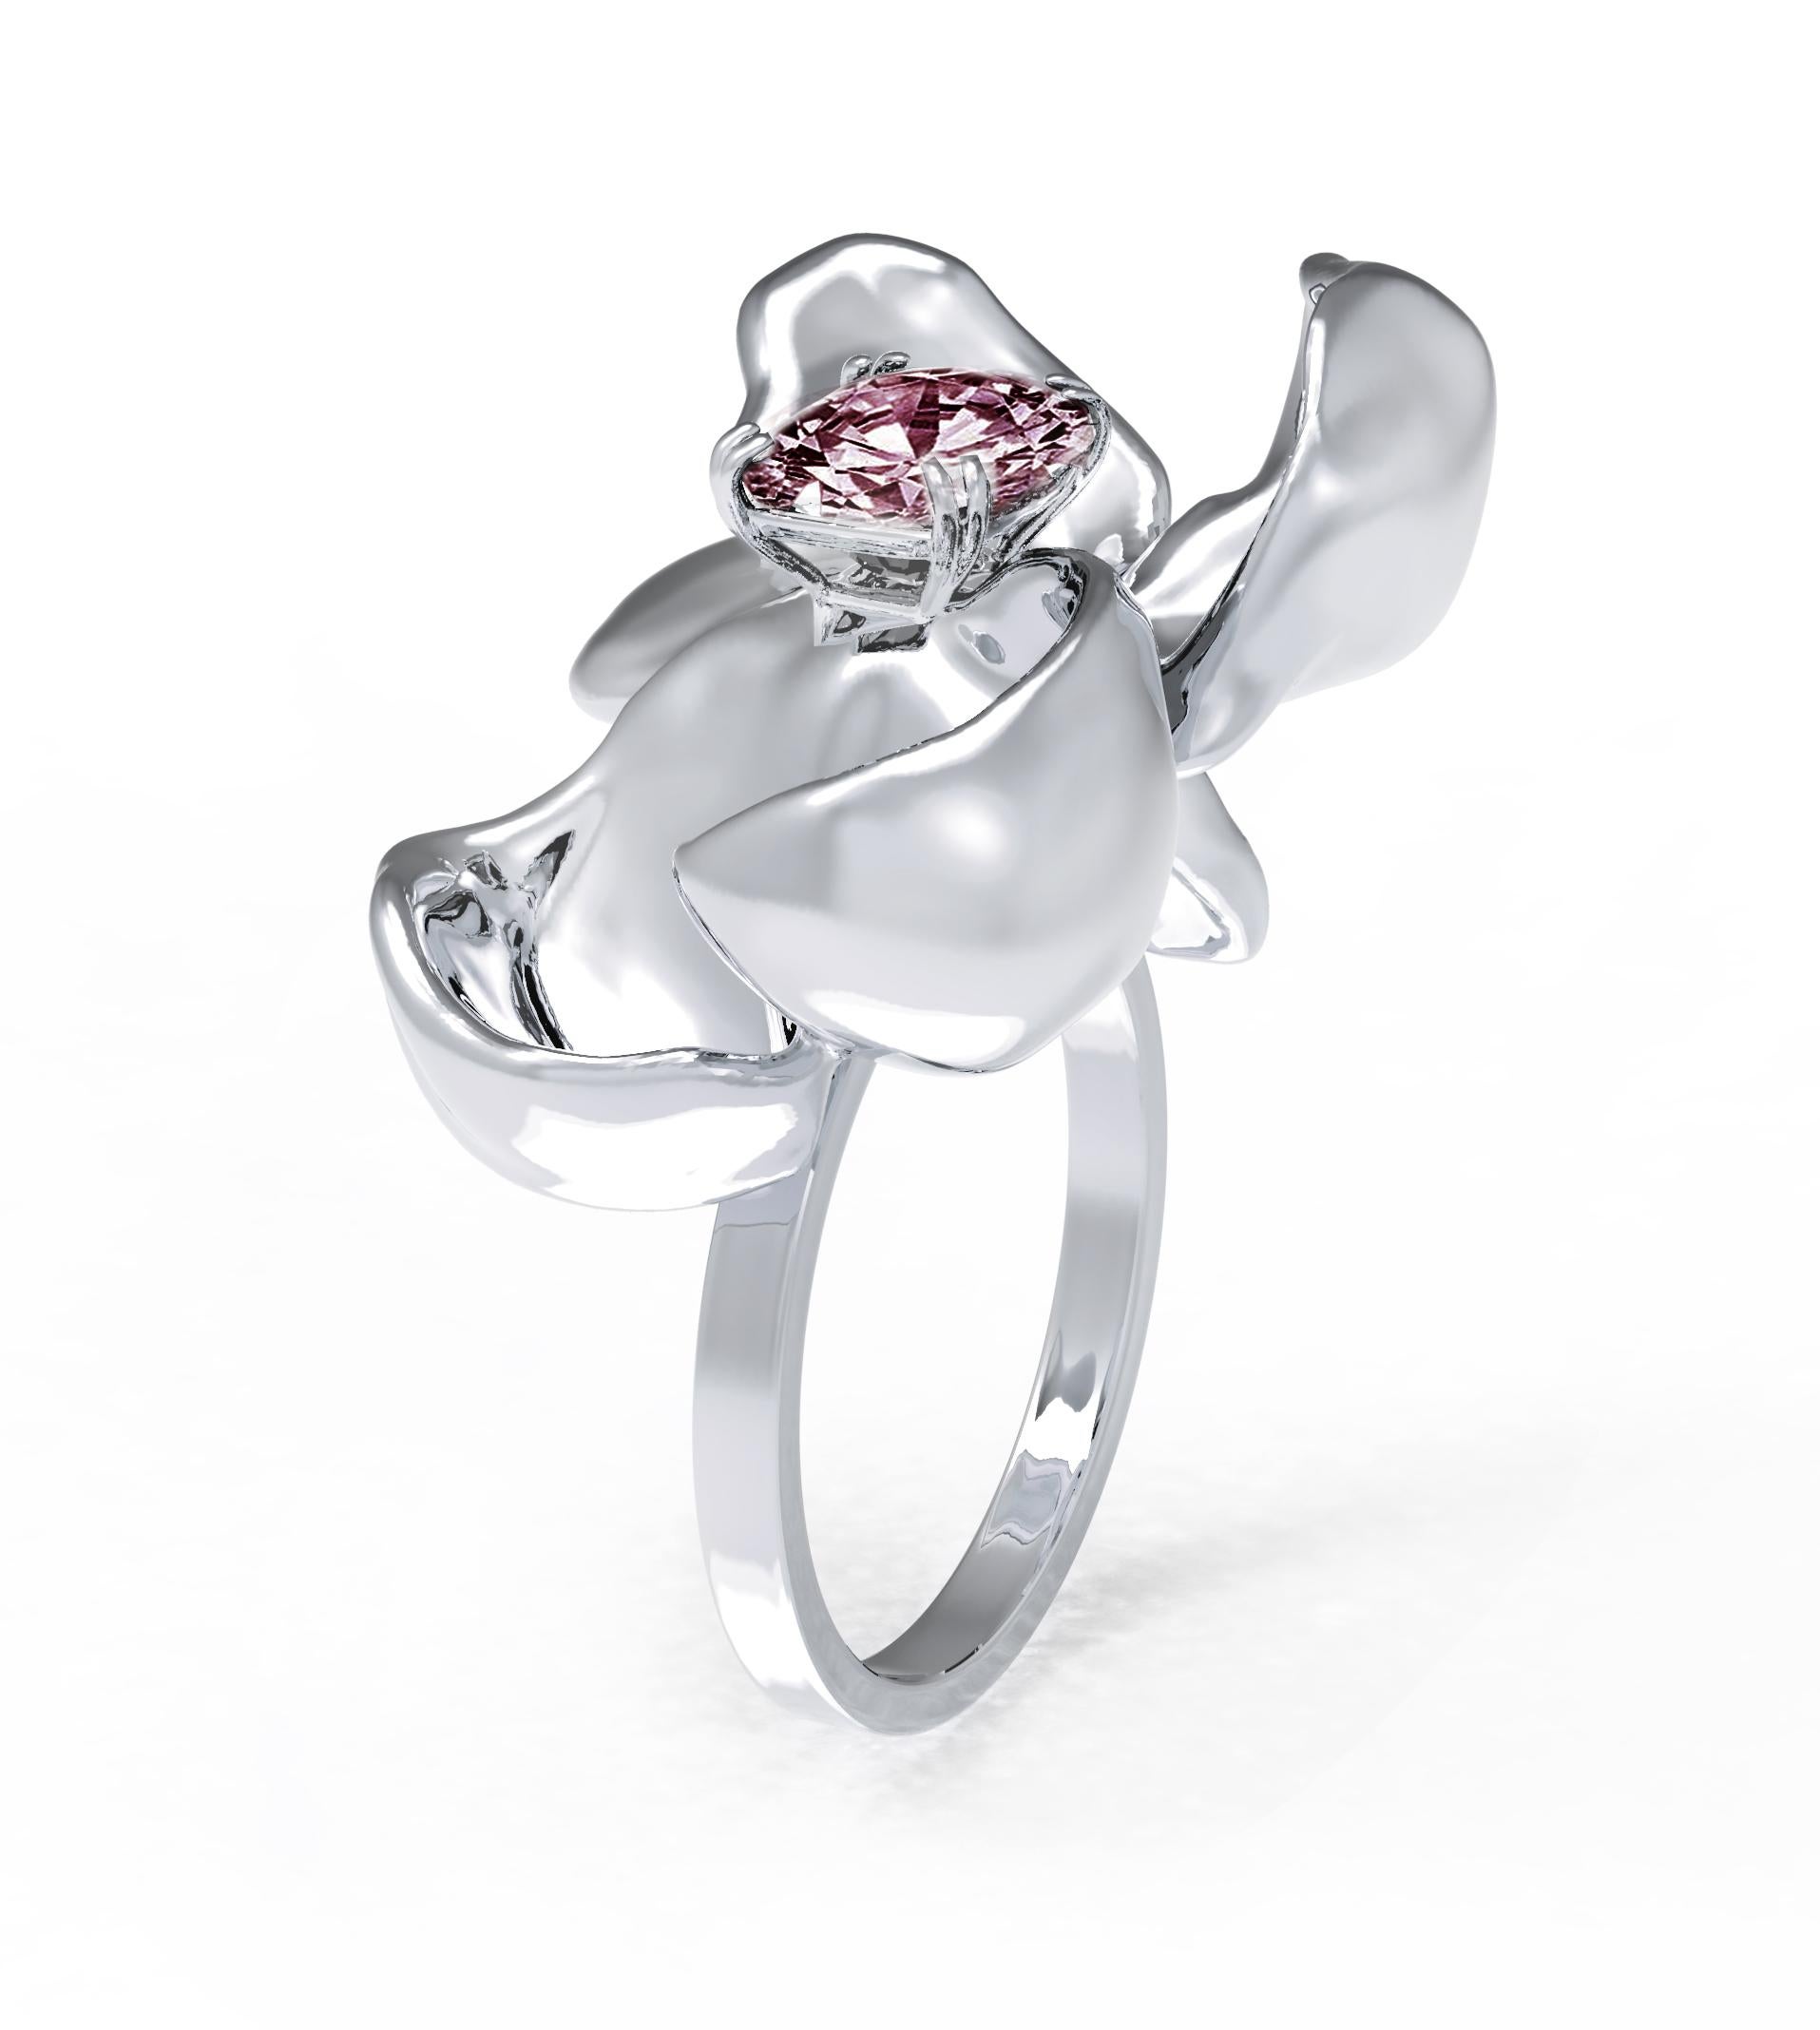 This contemporary Magnolia Flower cocktail ring is crafted in 18 karat white gold and features a stunning berry purple cushion spinel weighing 1.7 carats. The water-surface of the spinel amplifies the light, creating a stunning reflection on the